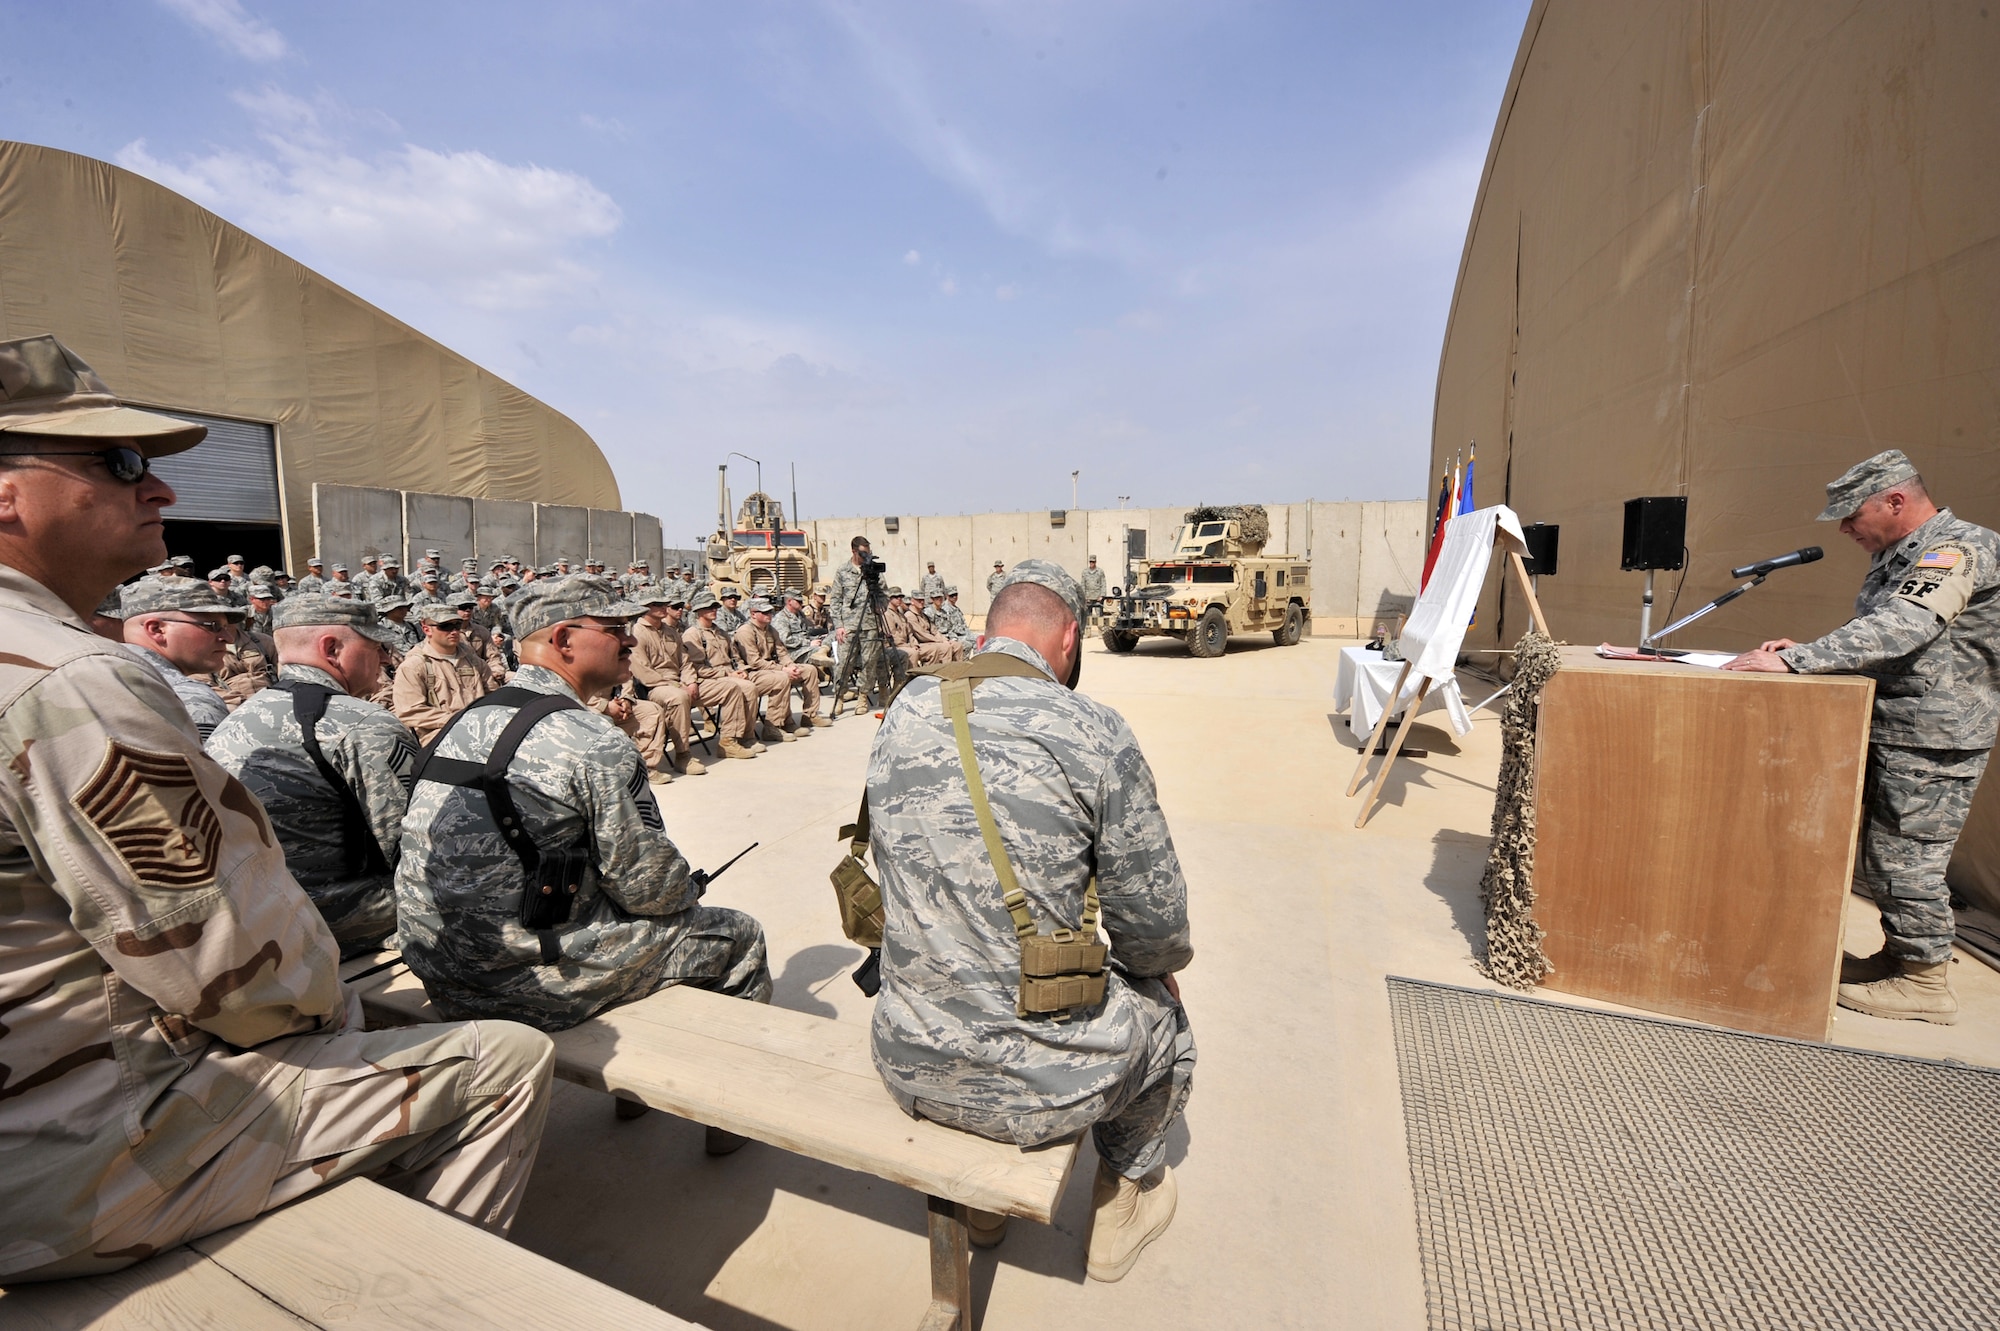 SATHER AIR BASE, Iraq – Lt. Col. Steven Painter, 447th Expeditionary Security Forces commander, addresses more than 75 447th ESFS members and fellow Airmen April 3 during a dedication ceremony here honoring Staff Sergeant Travis Griffin, a fallen security forces member who lost his life April 3, 2008, while on patrol in Baghdad, Iraq. During the ceremony, Sather Airmen renamed the base fitness center after Sergeant Griffin. What was once the Tigris Fitness Center is now the Travis L. Griffin Fitness Center. (U.S. Air Force photo by Staff Sgt. Amanda Currier)